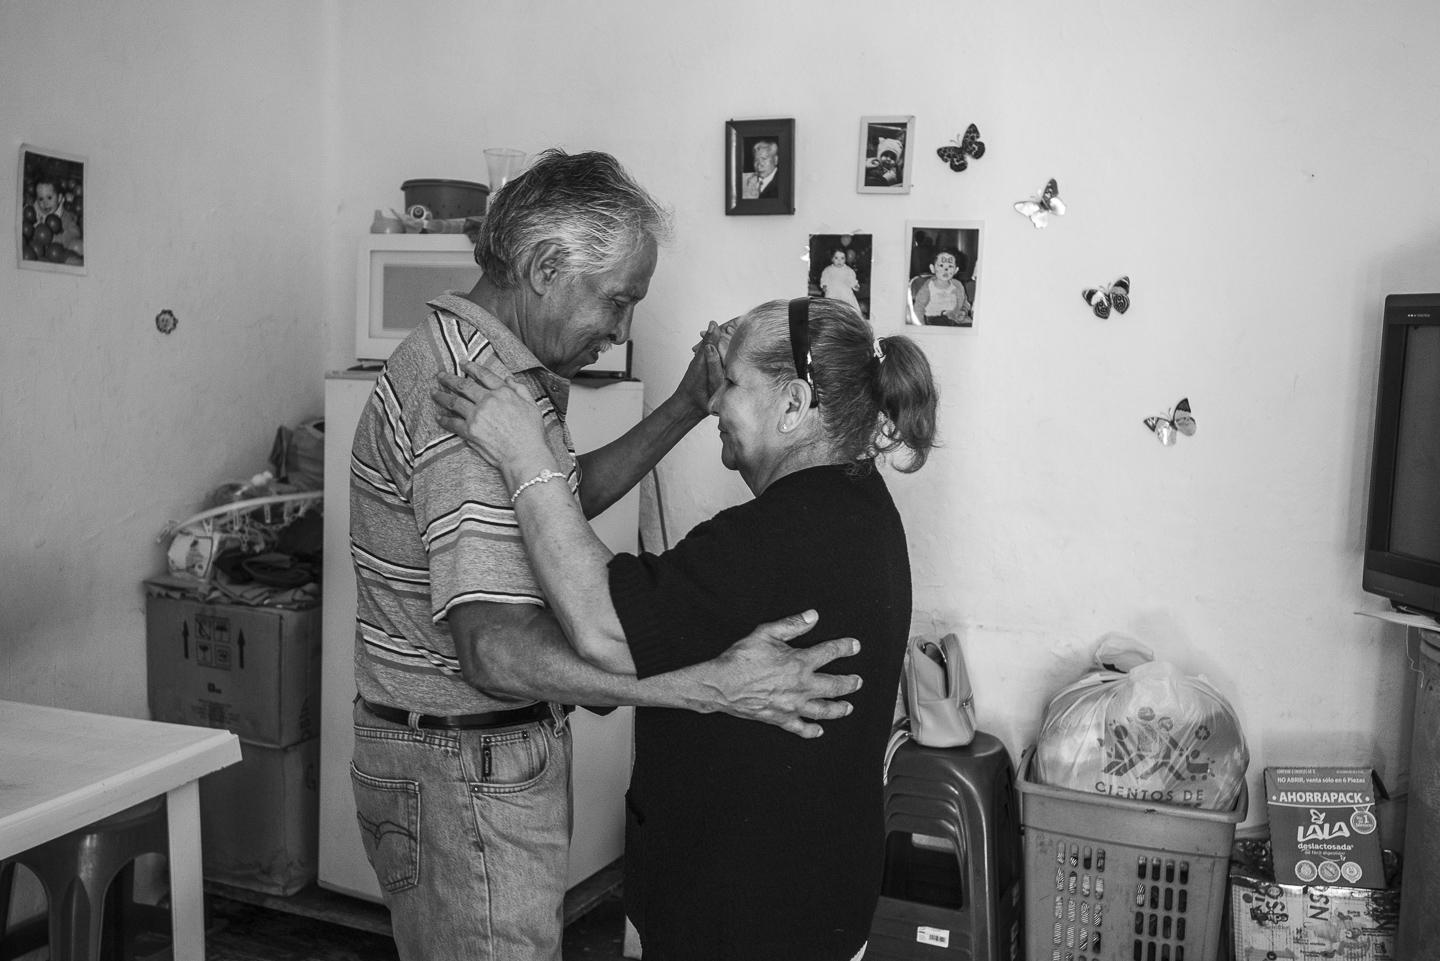 Letters from a distance - Mrs. Enriqueta Hern&aacute;ndez and her husband Manuel Zaragoza have been reunited after...